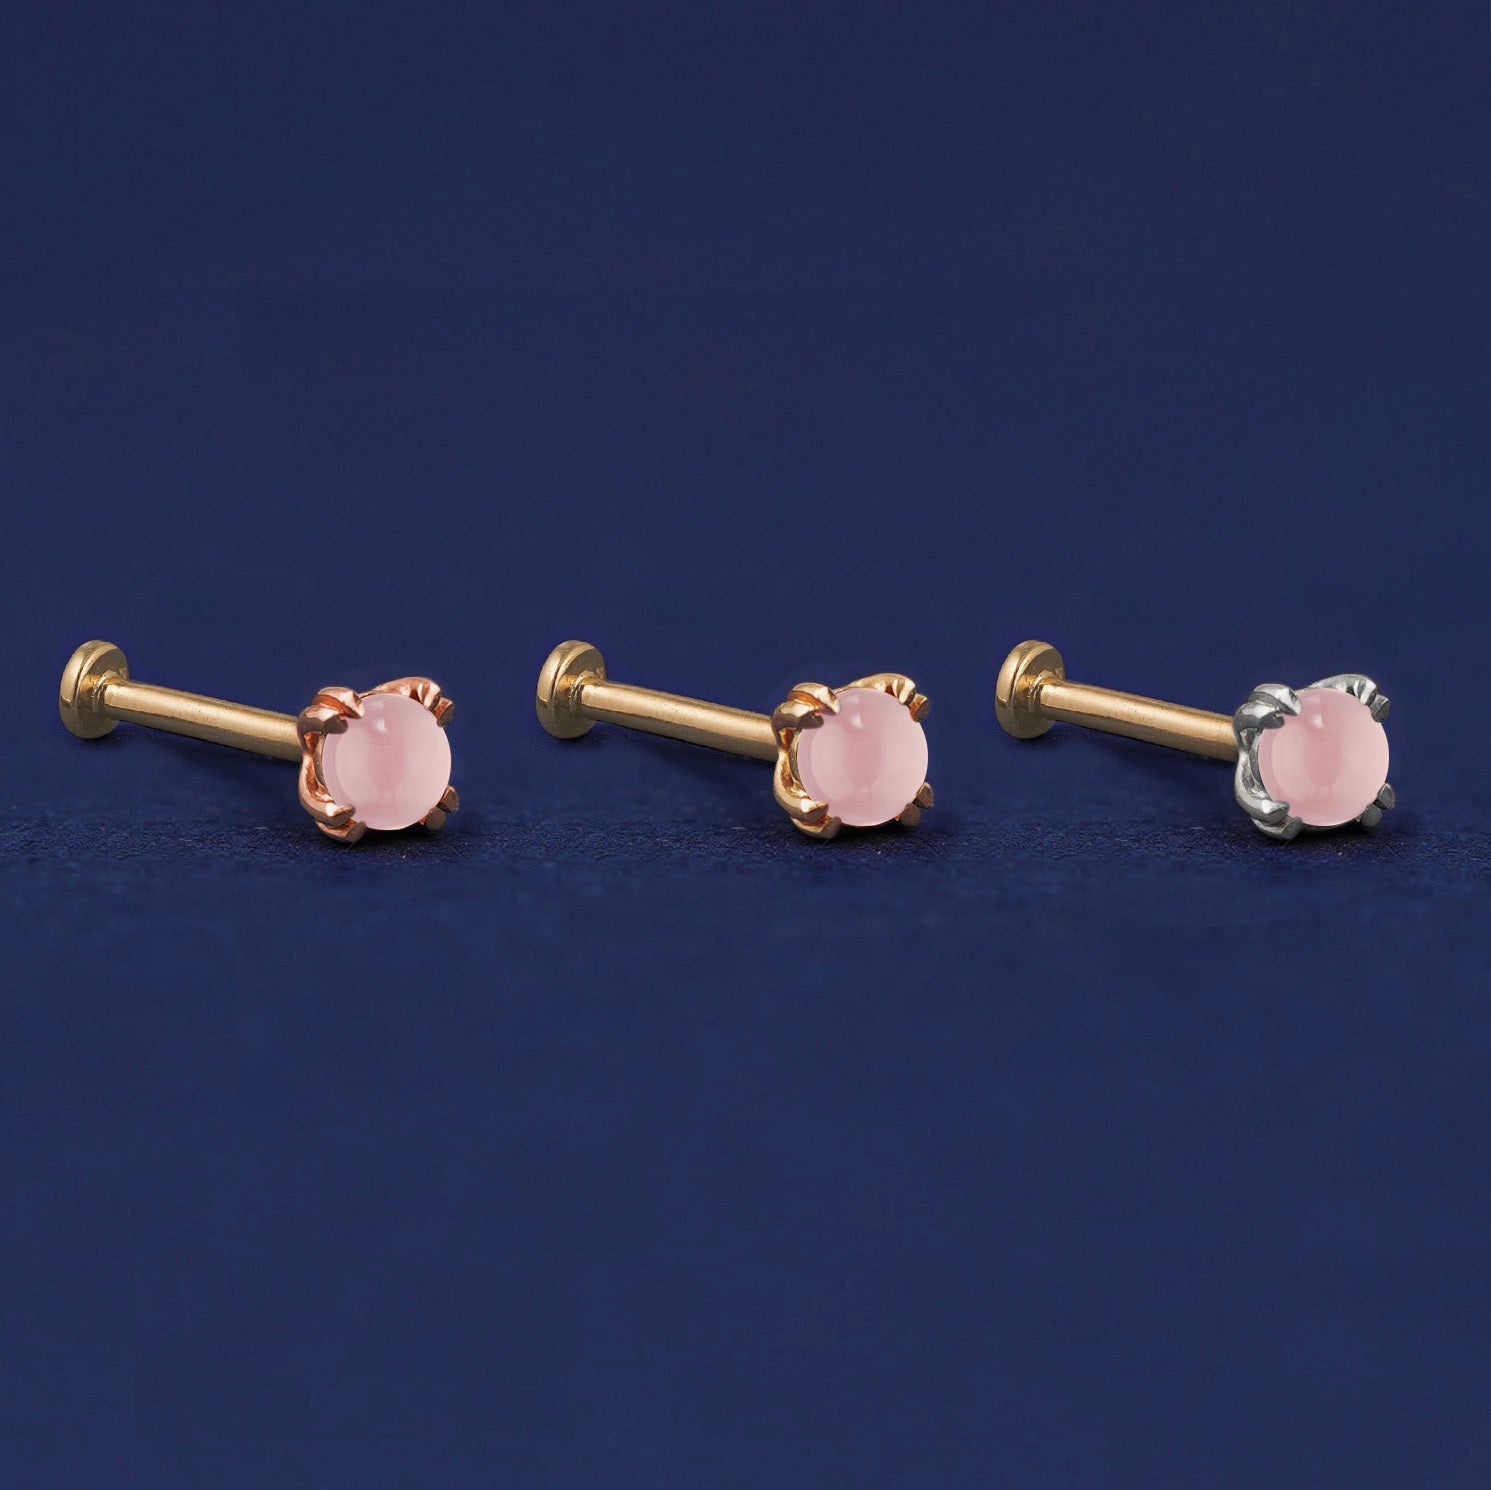 Three versions of the Rose Quartz Flat Back Earring shown in options of rose, yellow, and white gold